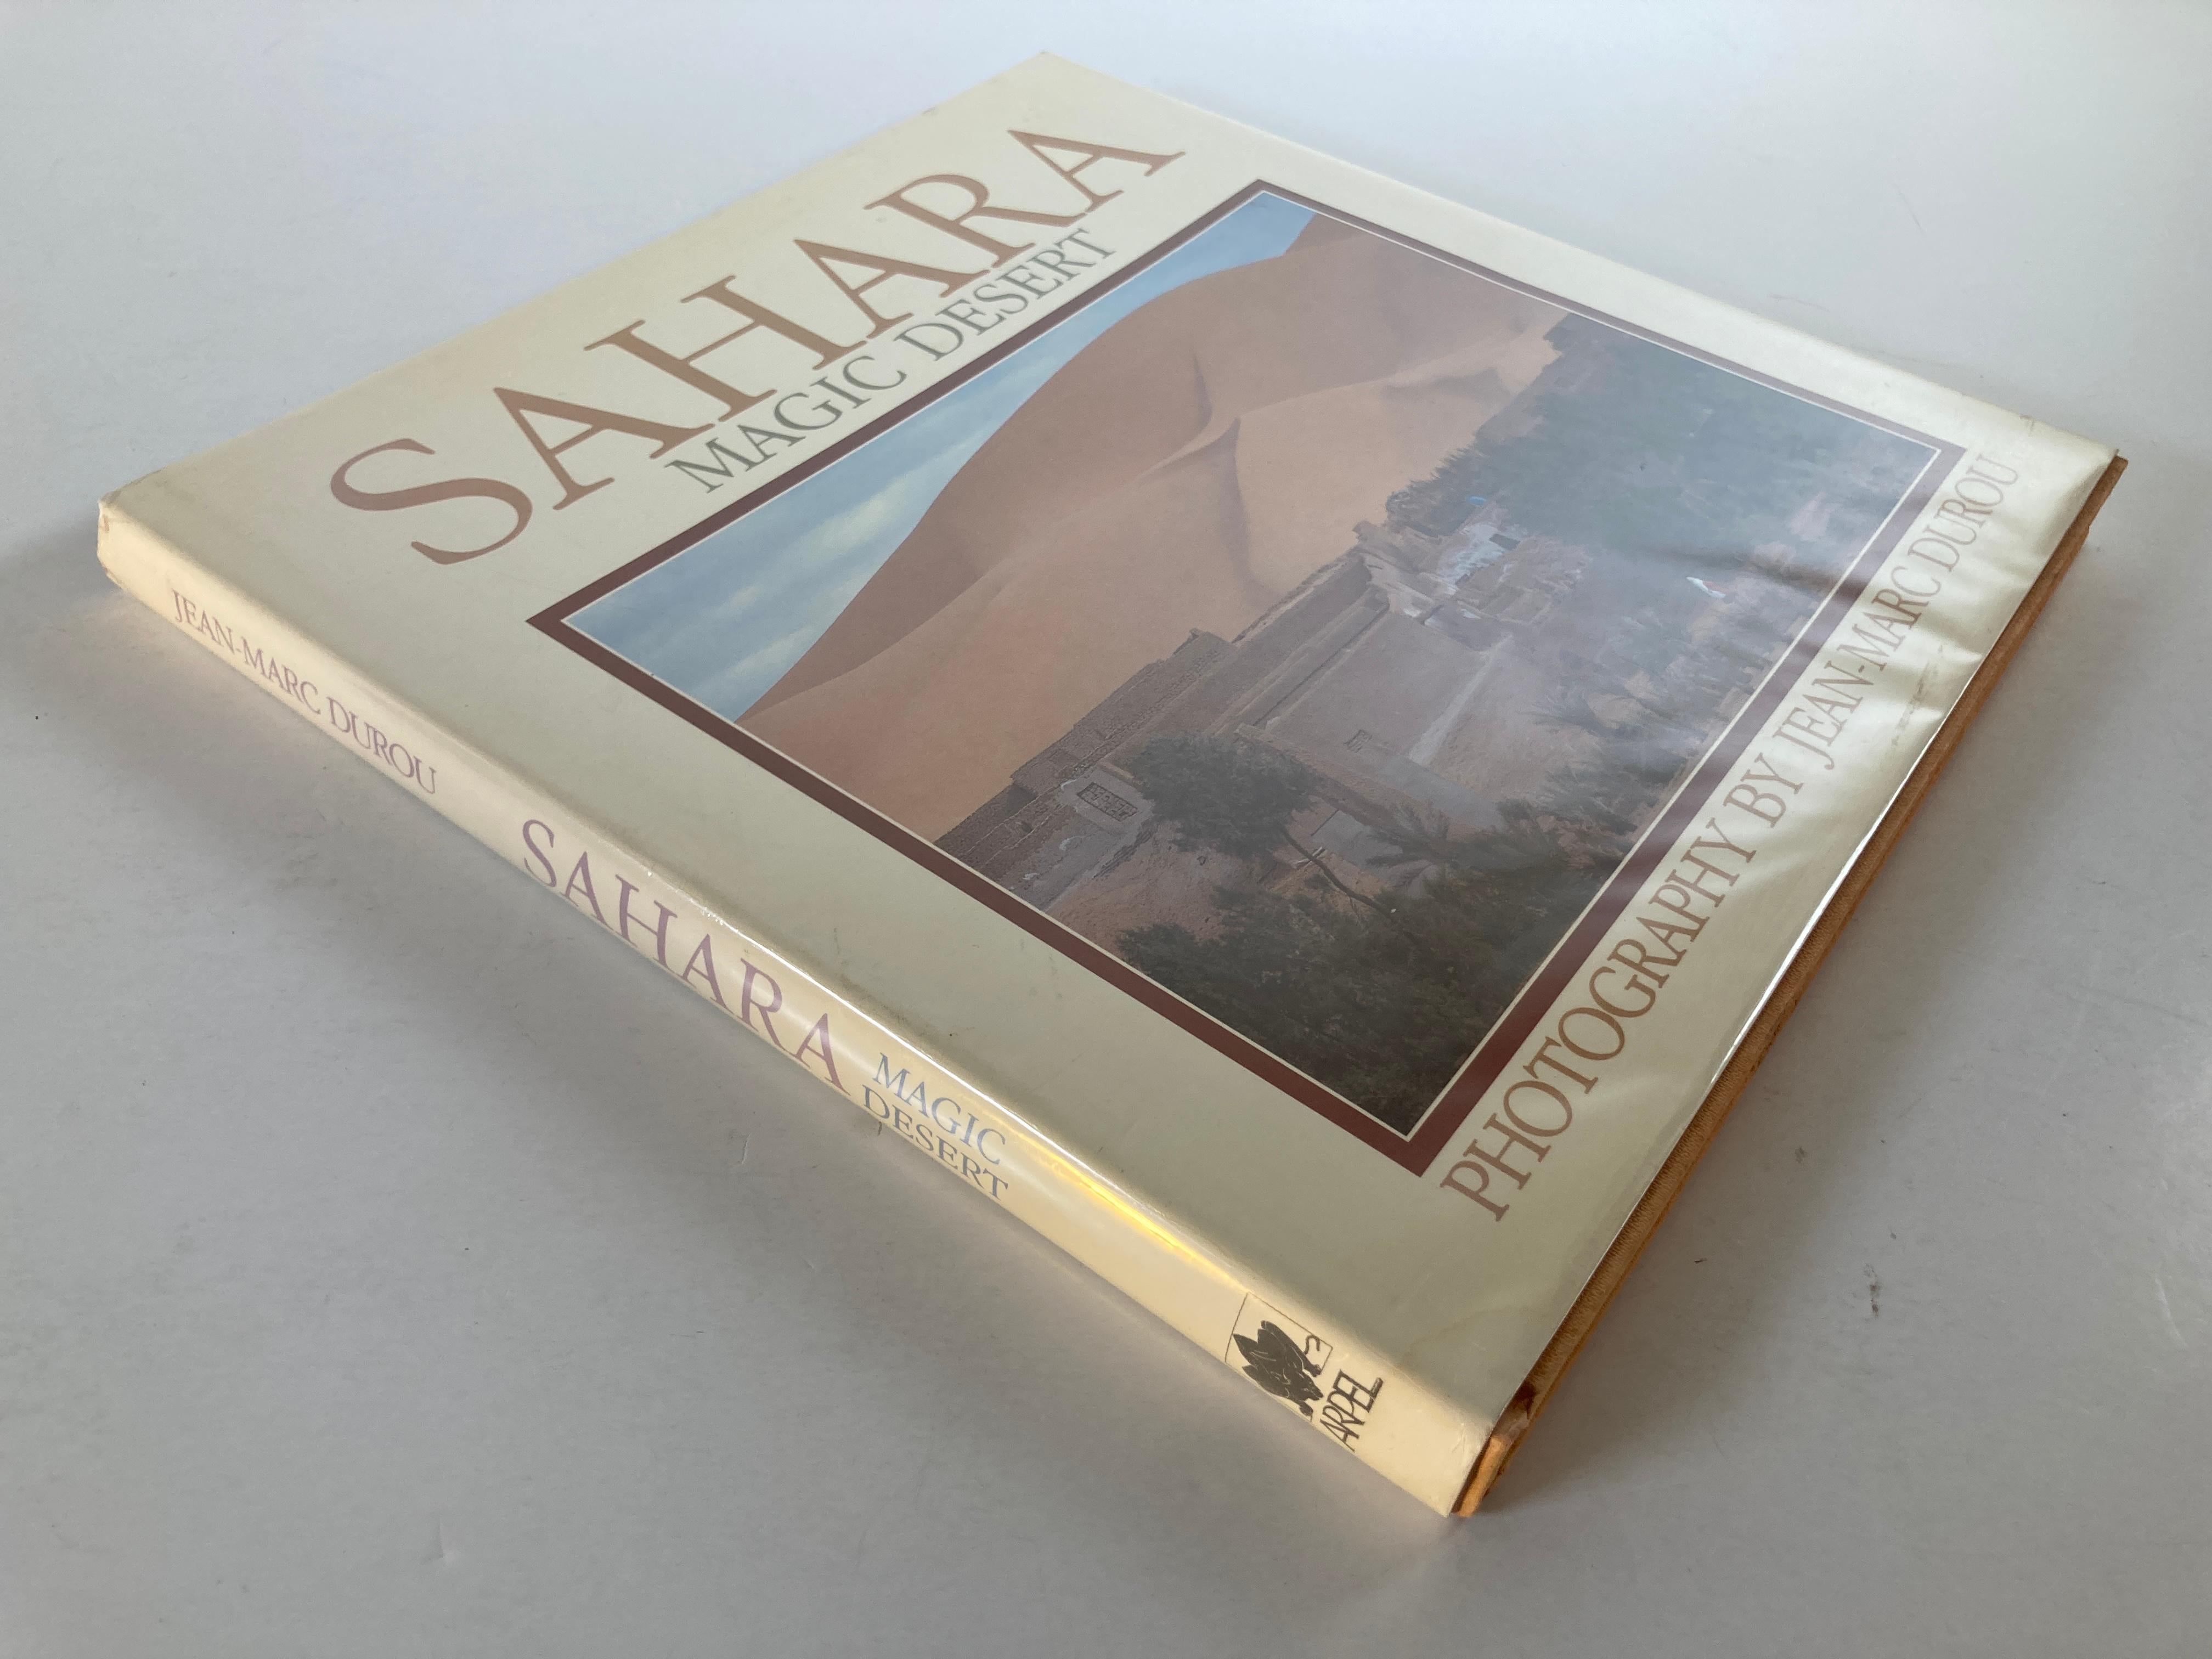 SAHARA Magic Desert hardcover book
Photographs show the Sahara's mountains, sand dunes, canyons, oases, towns, and the daily life of its nomadic people, the Tuaregs.
Jean-Marc Durou, Théodore Monod
153 pp. First U.S. Edition. 
Title: SAHARA: